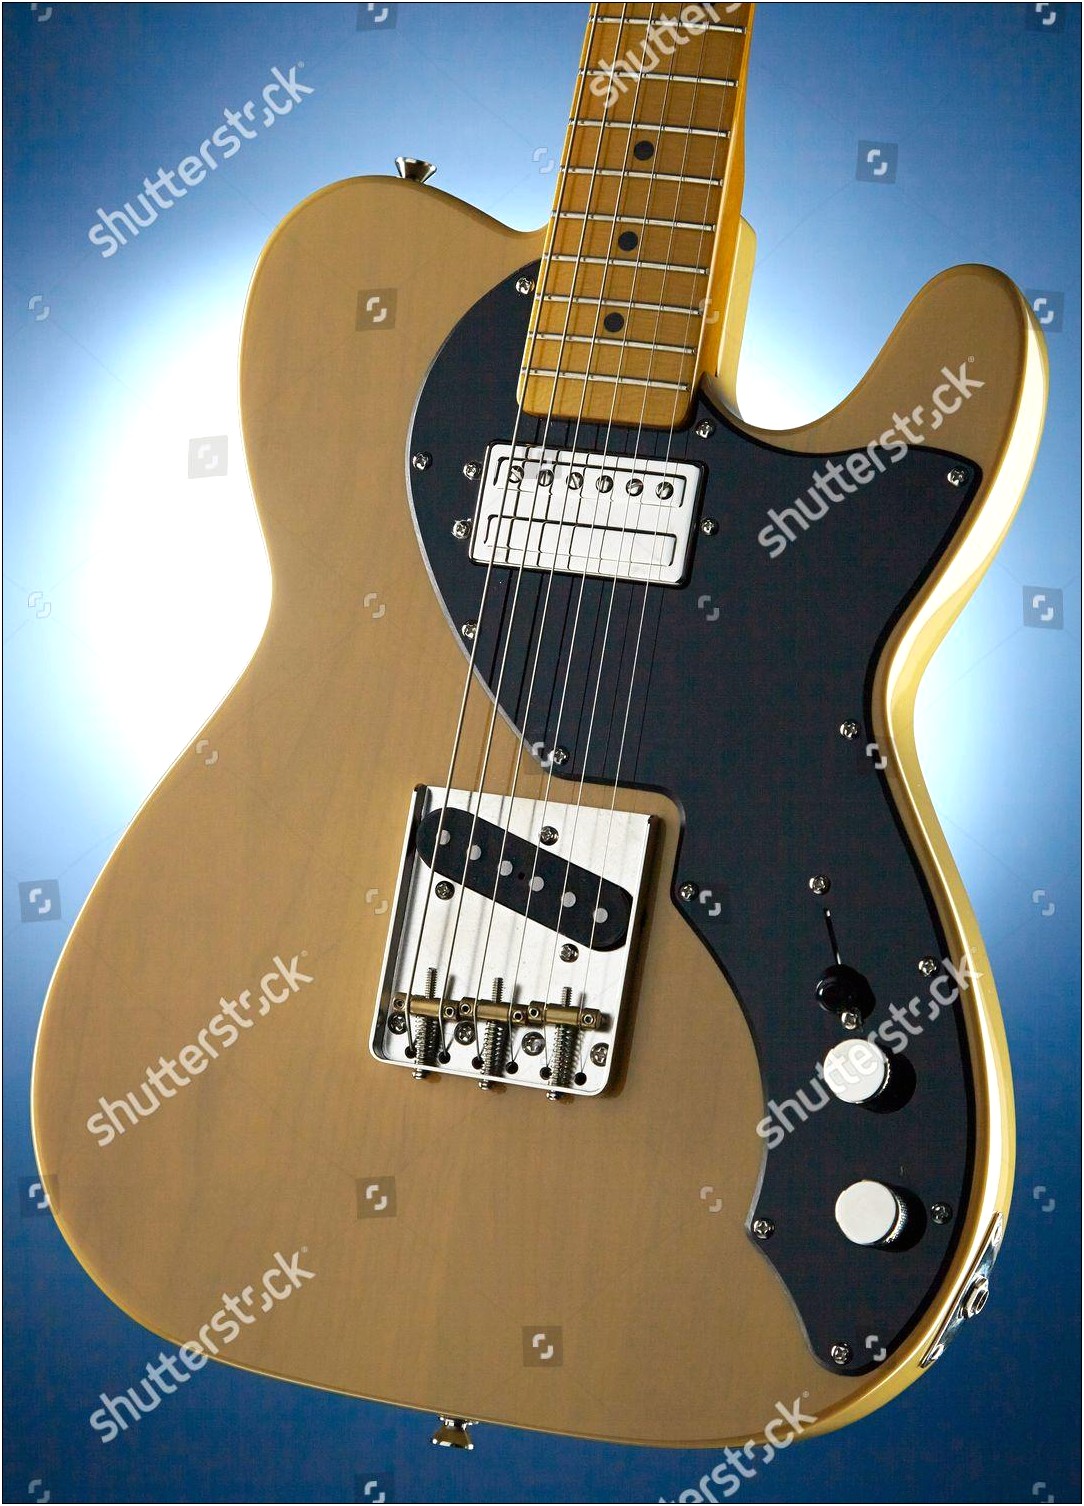 Modern Player Telecaster Body Template Download